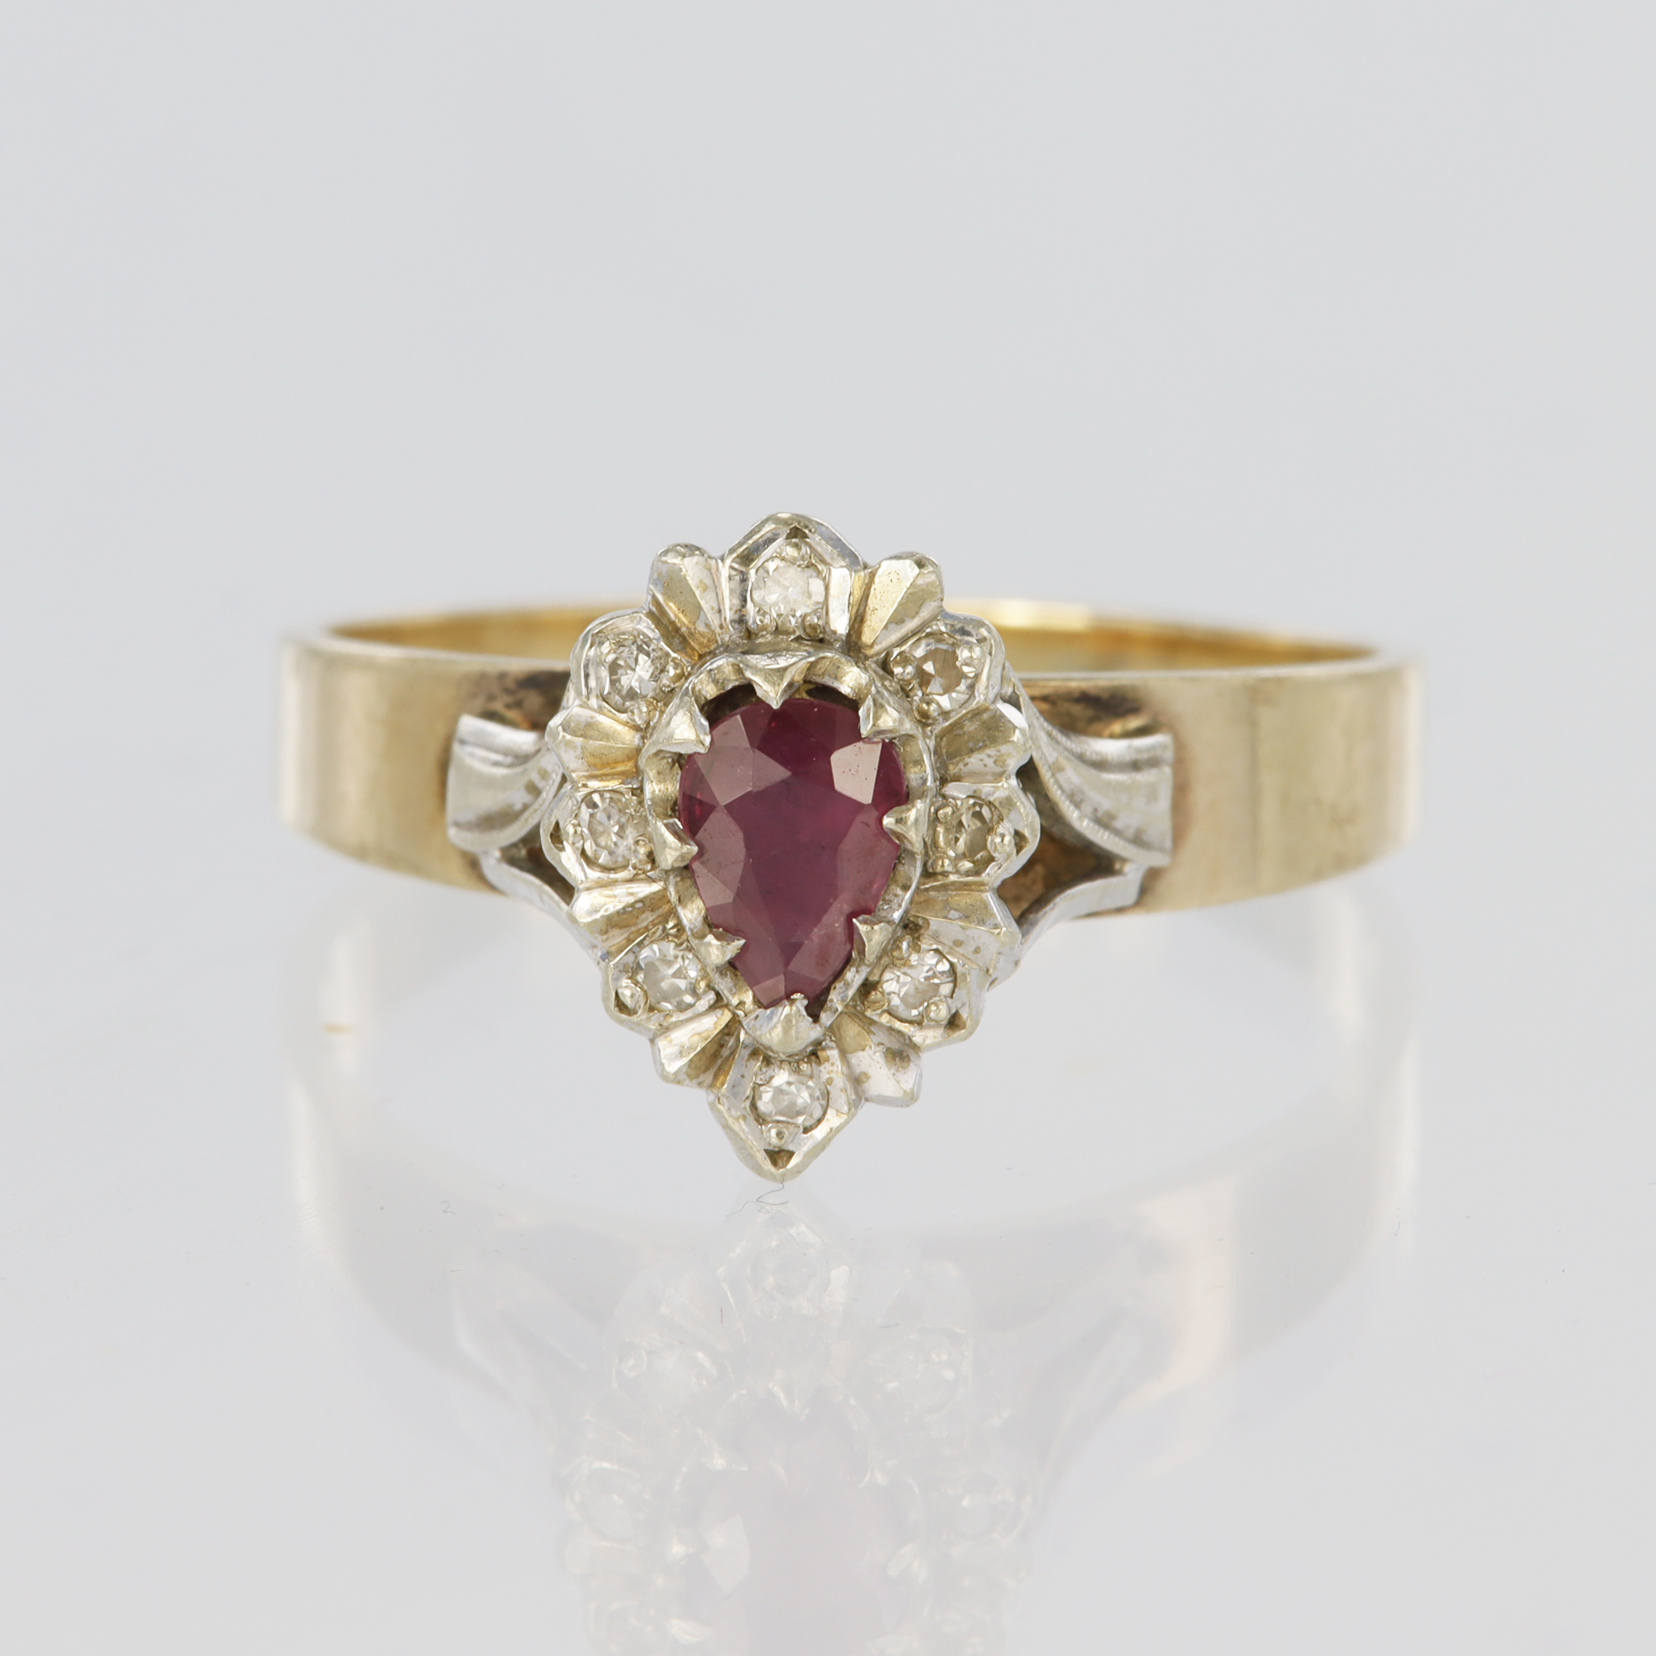 9ct yellow gold ring set with a central pear shaped ruby measuring approx. 6mm x 4mm and